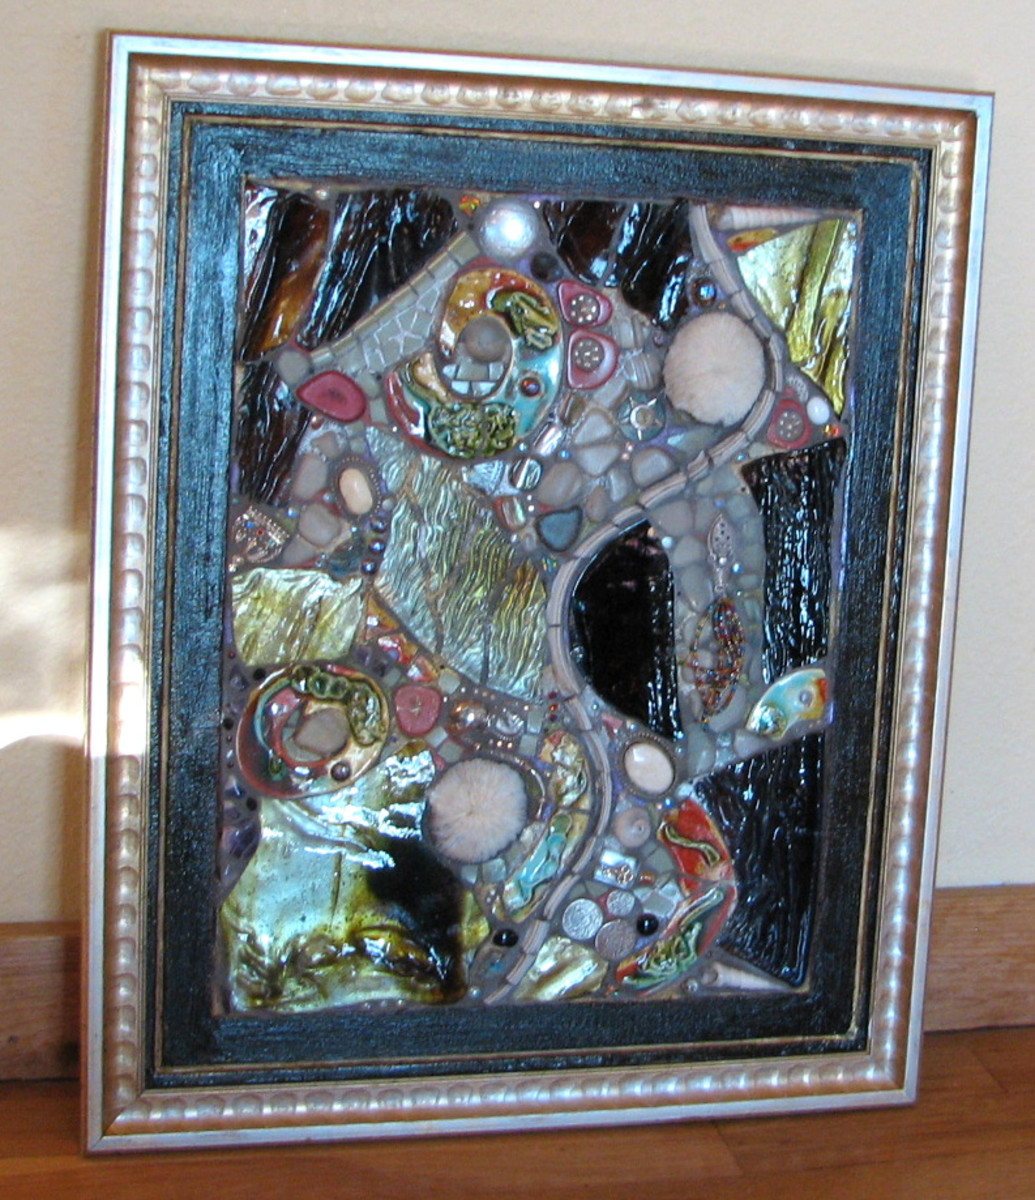 Wall hanging installed in wooden picture frame